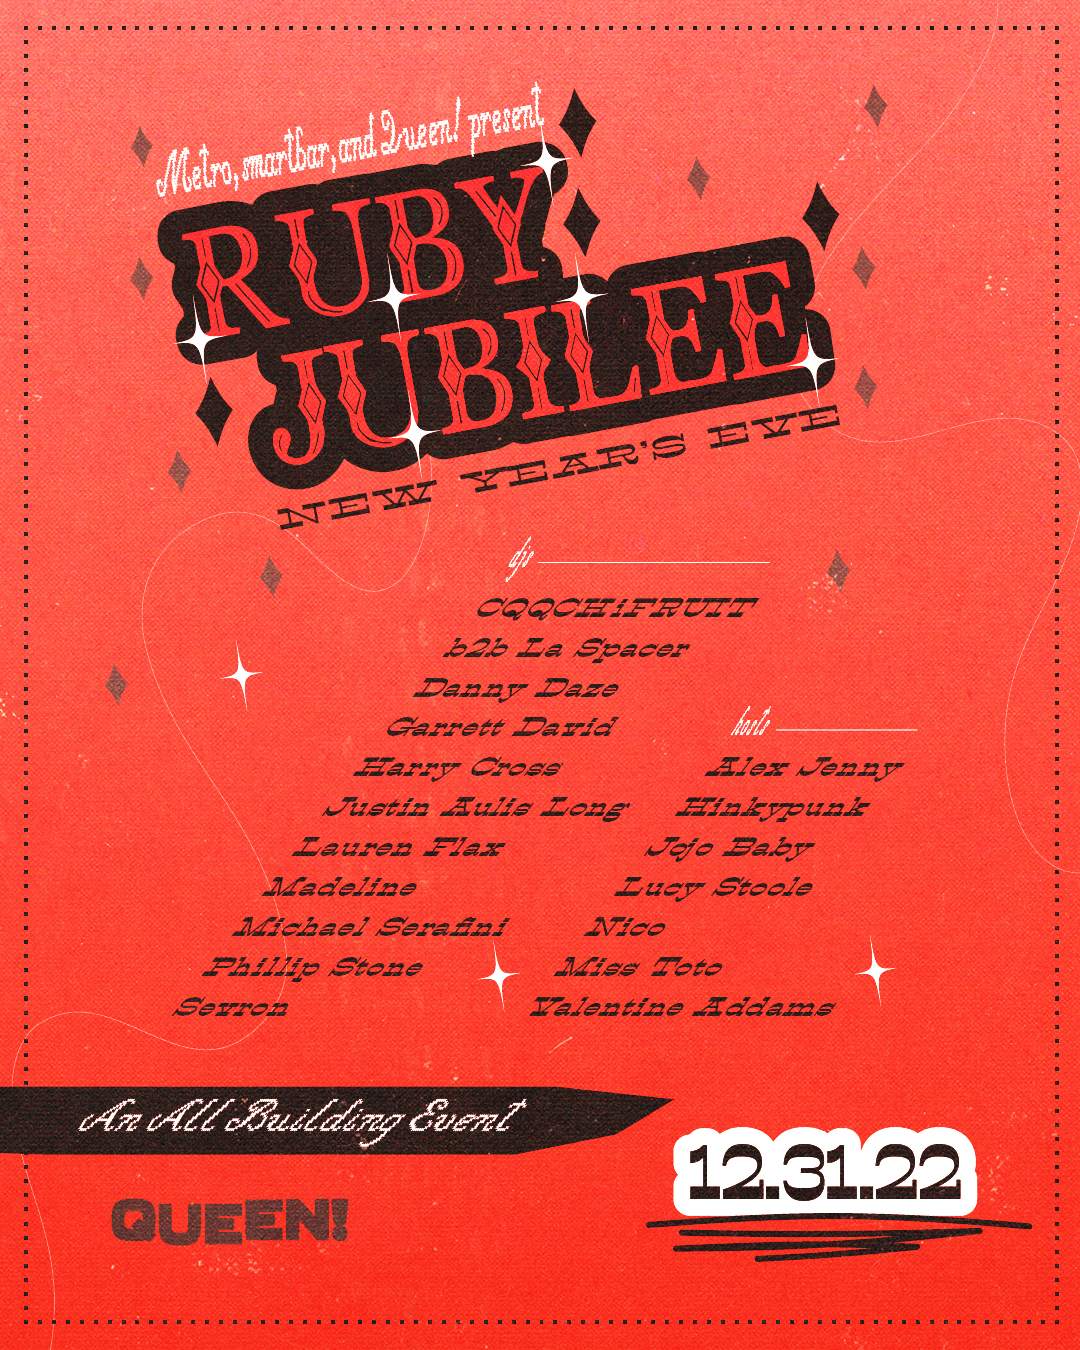 A 40th Anniversary Celebration Ruby Jubilee New Years Eve  feat. smartbar residents & friends - Página frontal